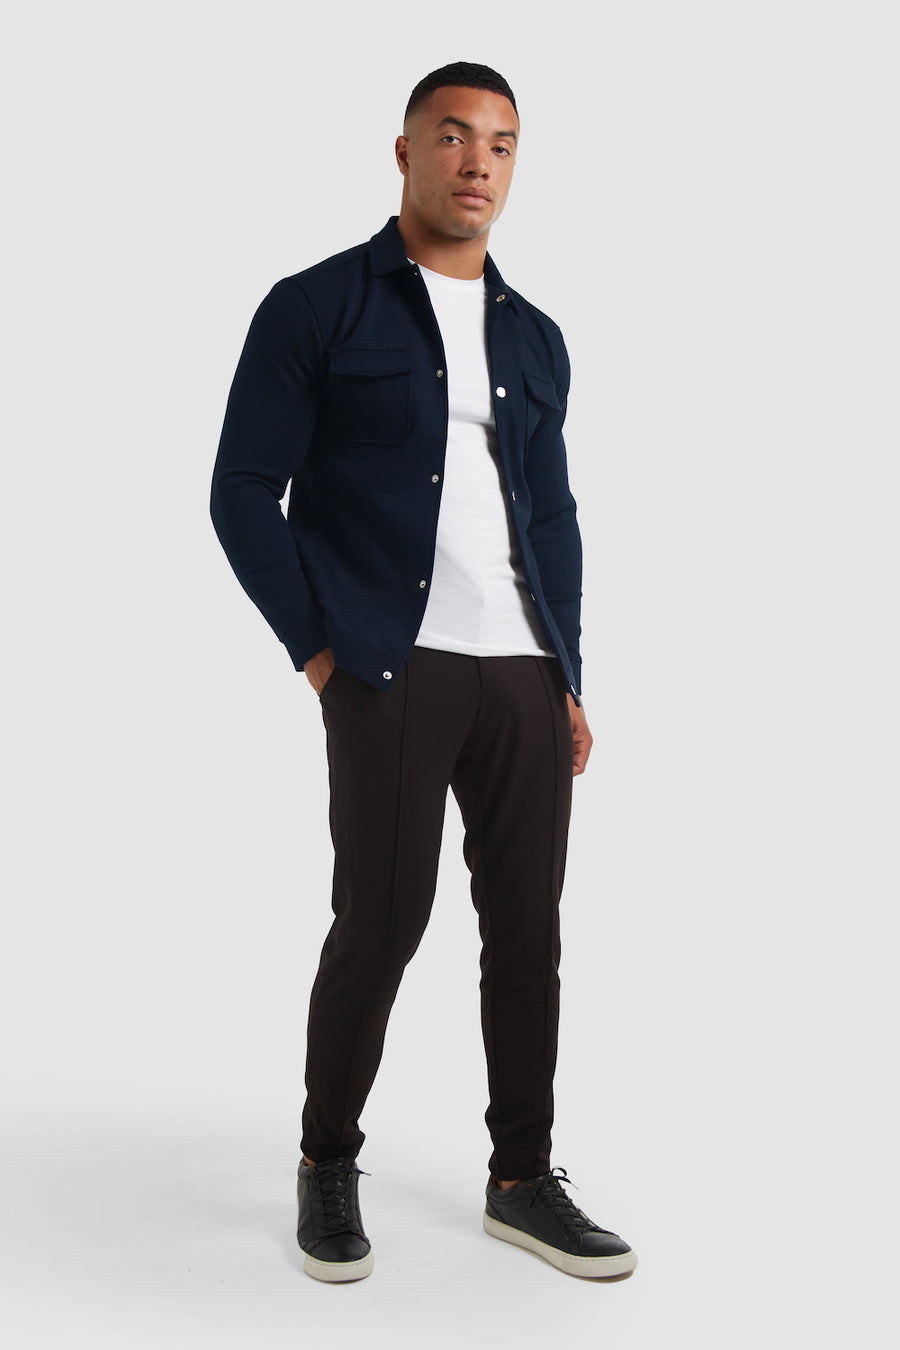 Jersey Shacket in Navy - TAILORED ATHLETE - USA